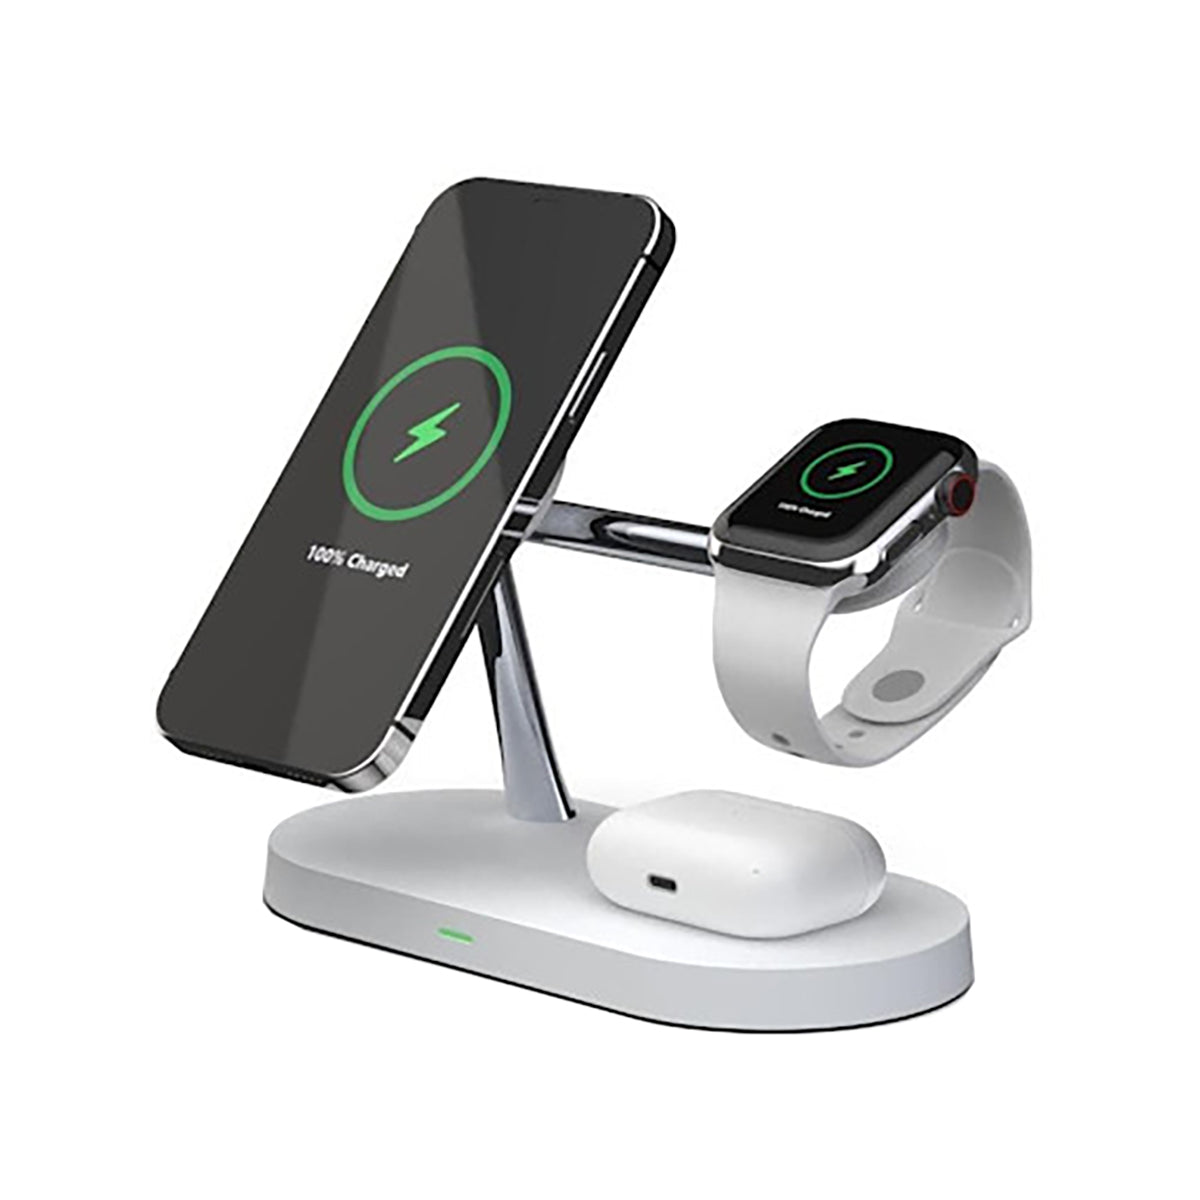 Oscar 4 in 1 Charging Stand for Mobile Phones